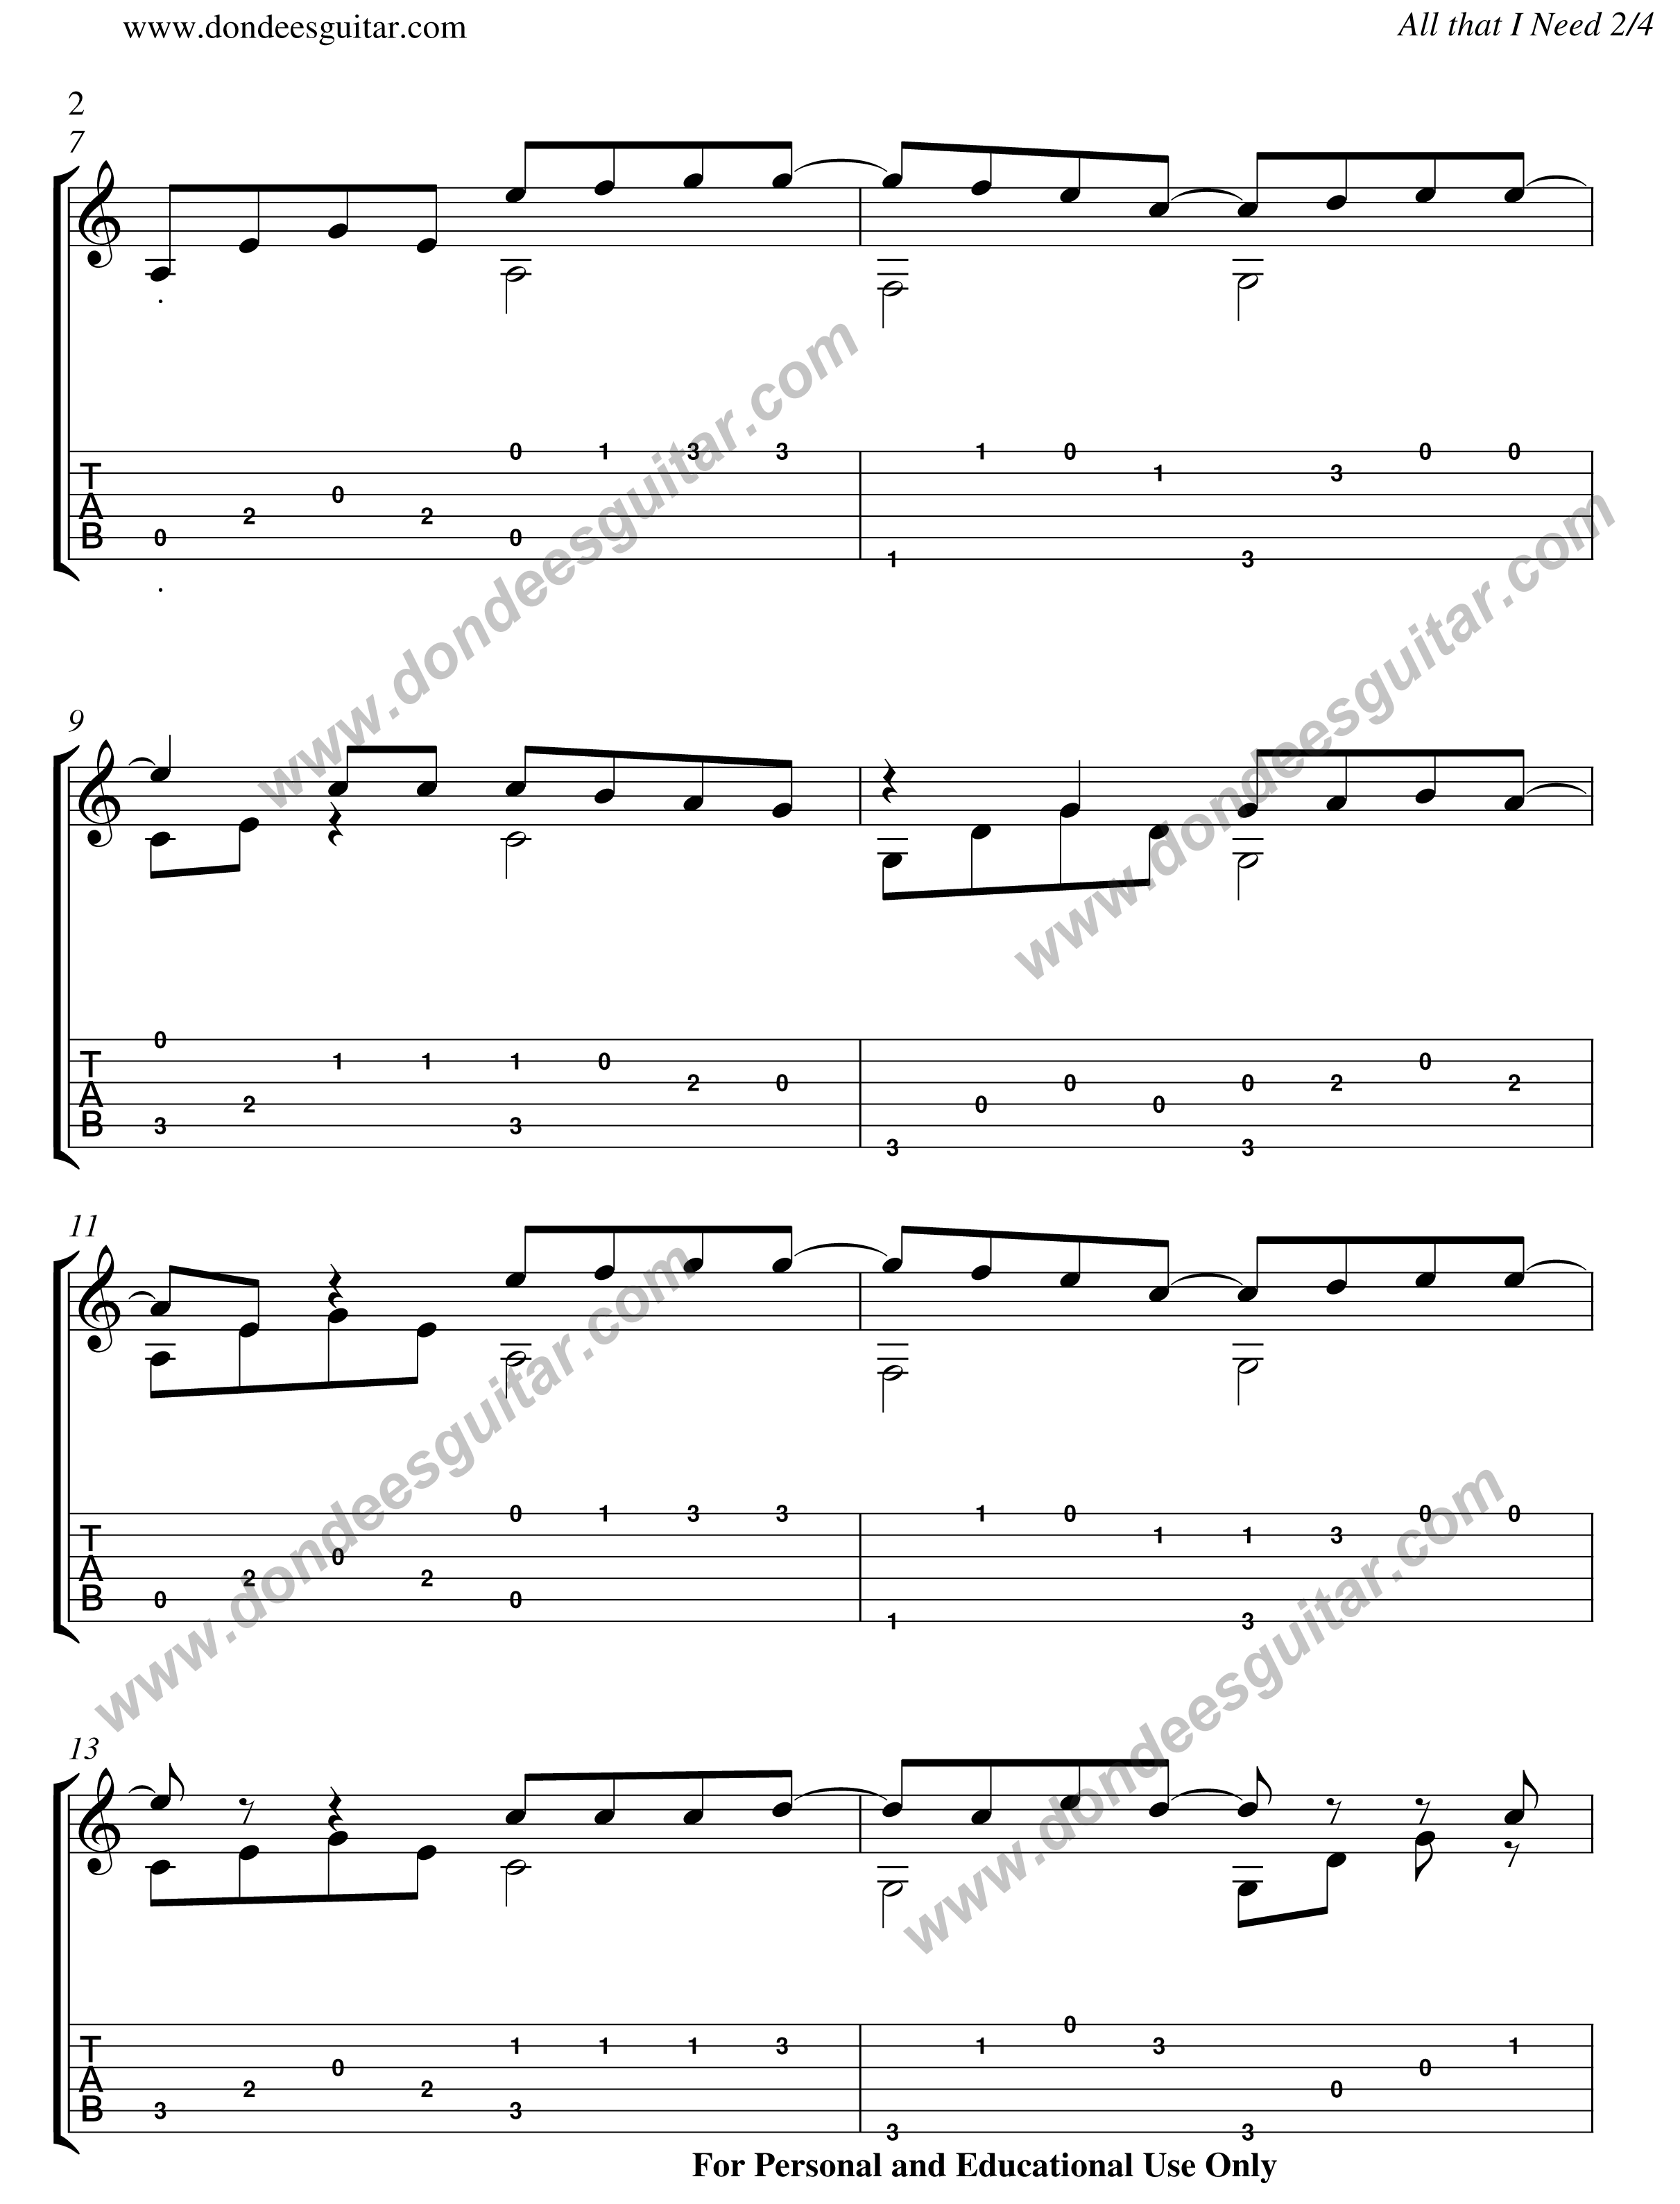 All That I Need Fingerstyle Tabs